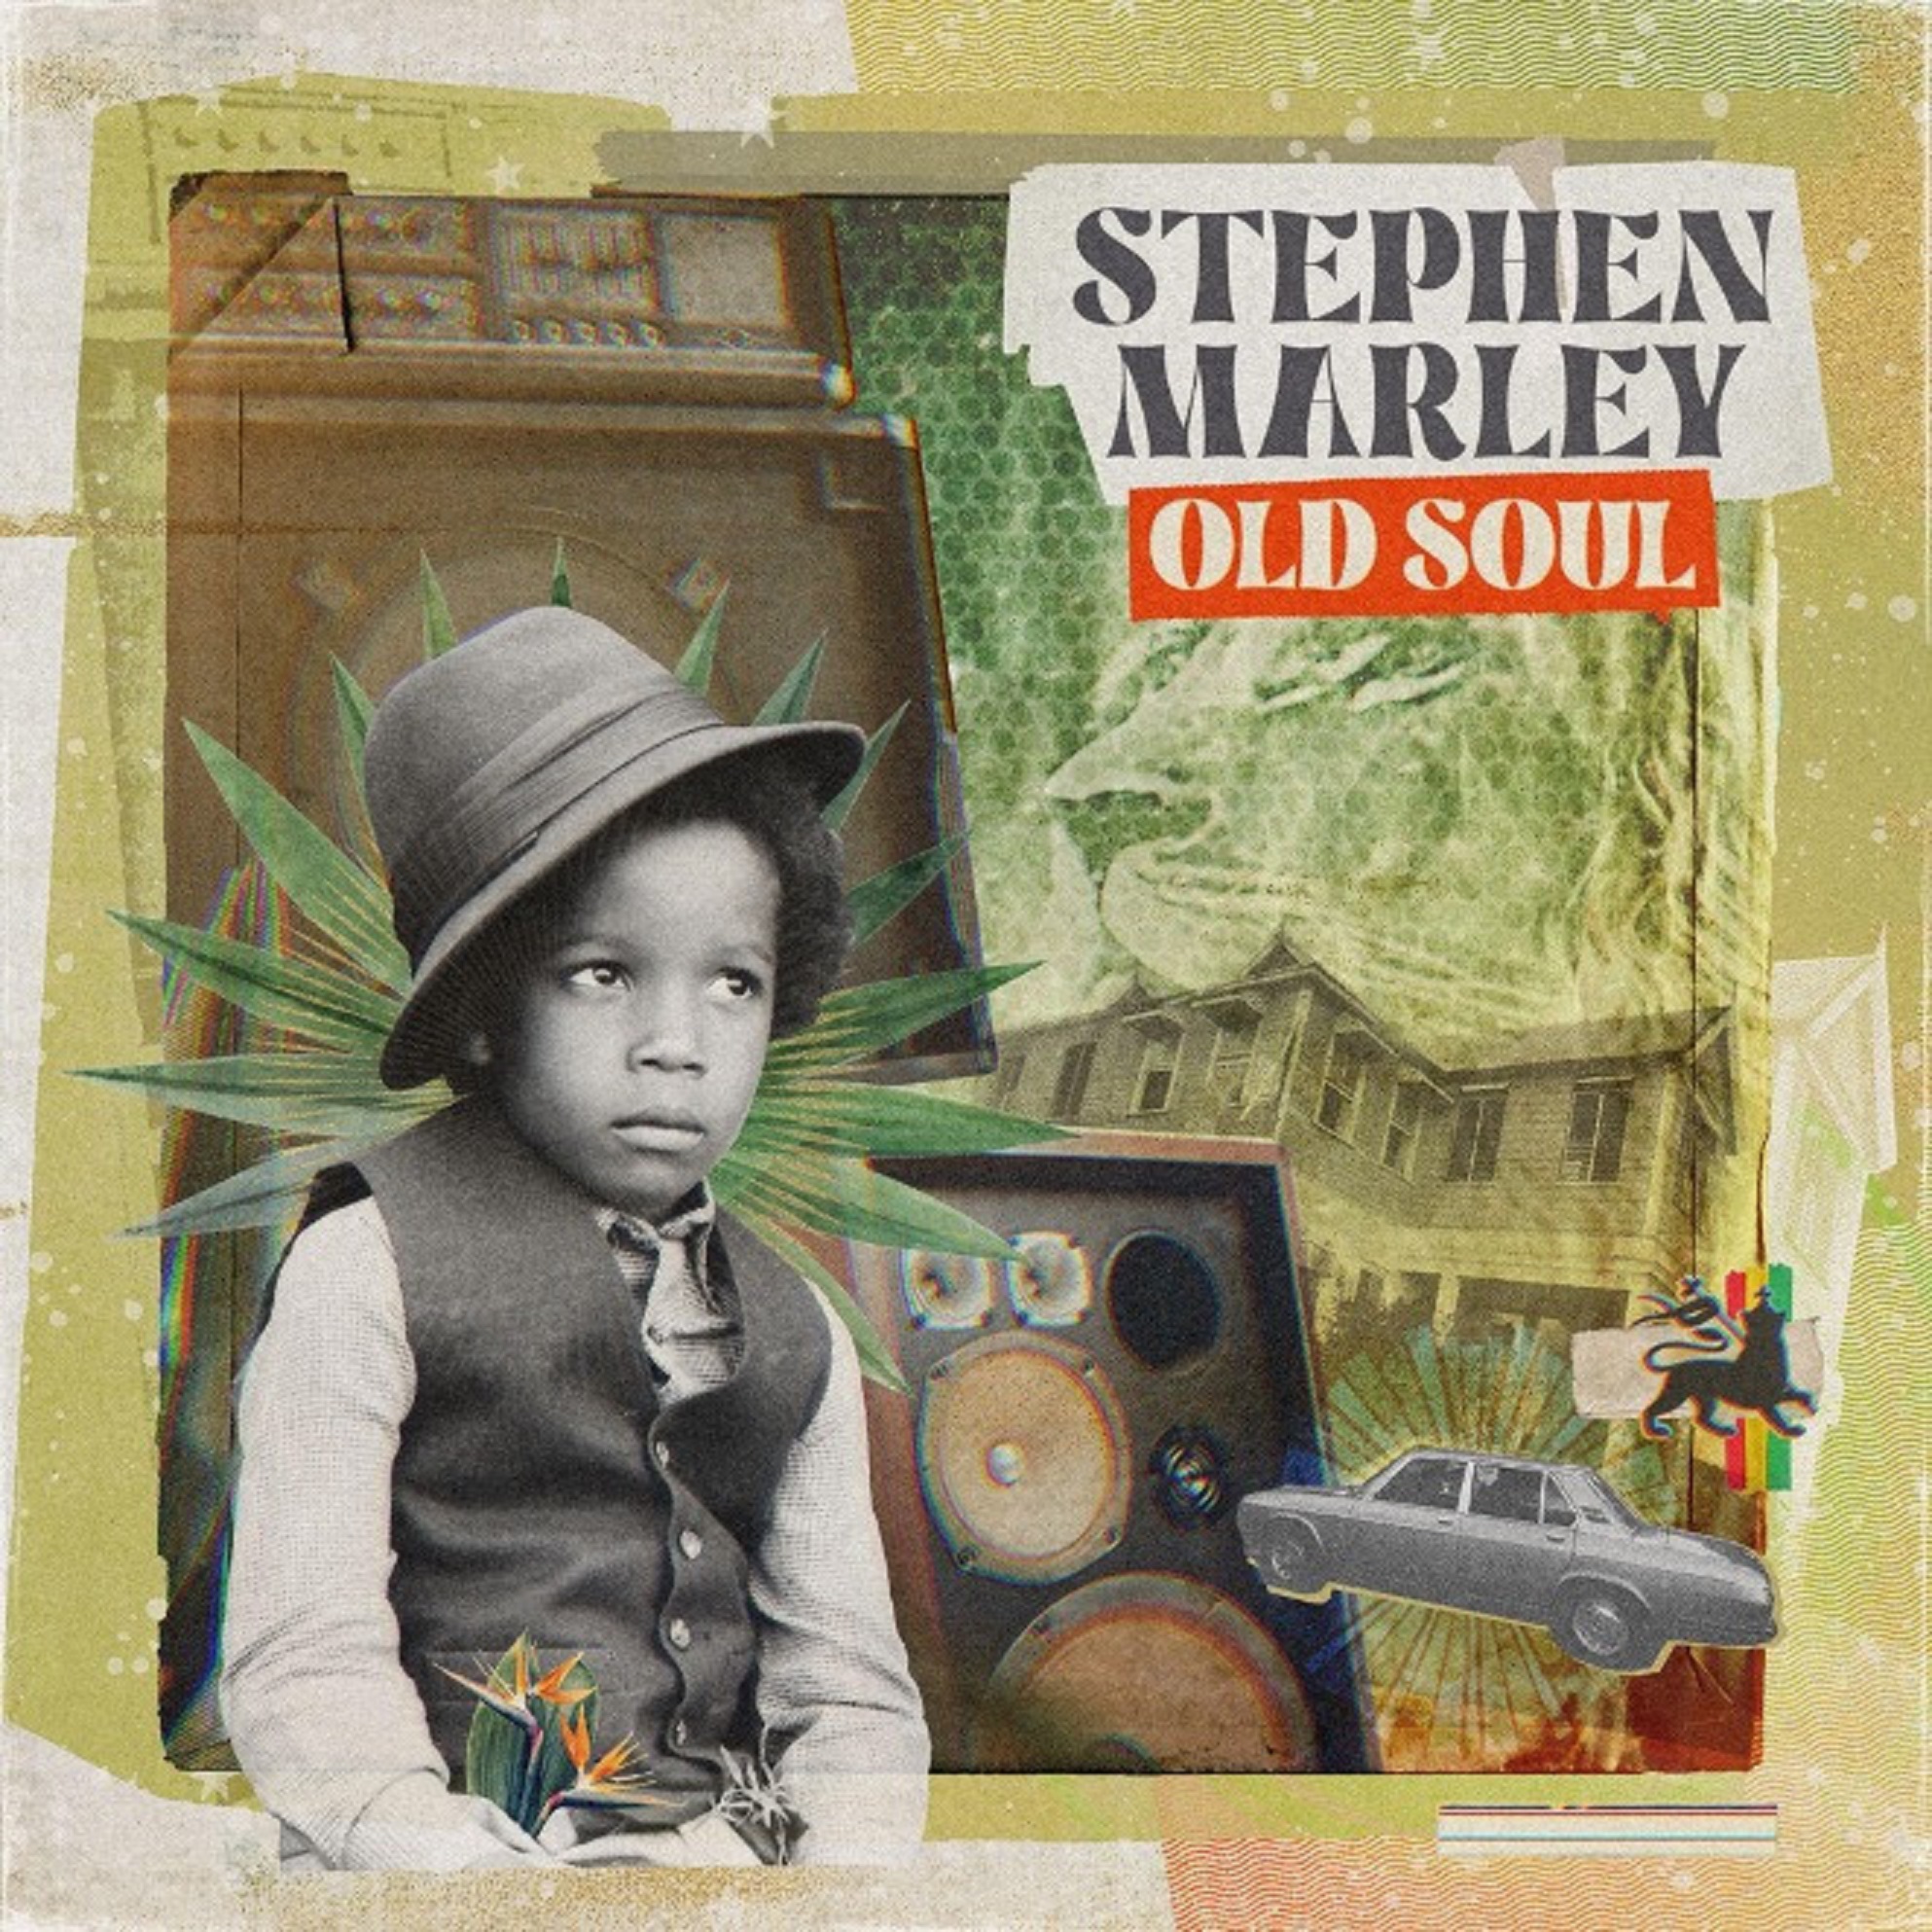 REVIEW: Stephen Marley's "Old Soul"